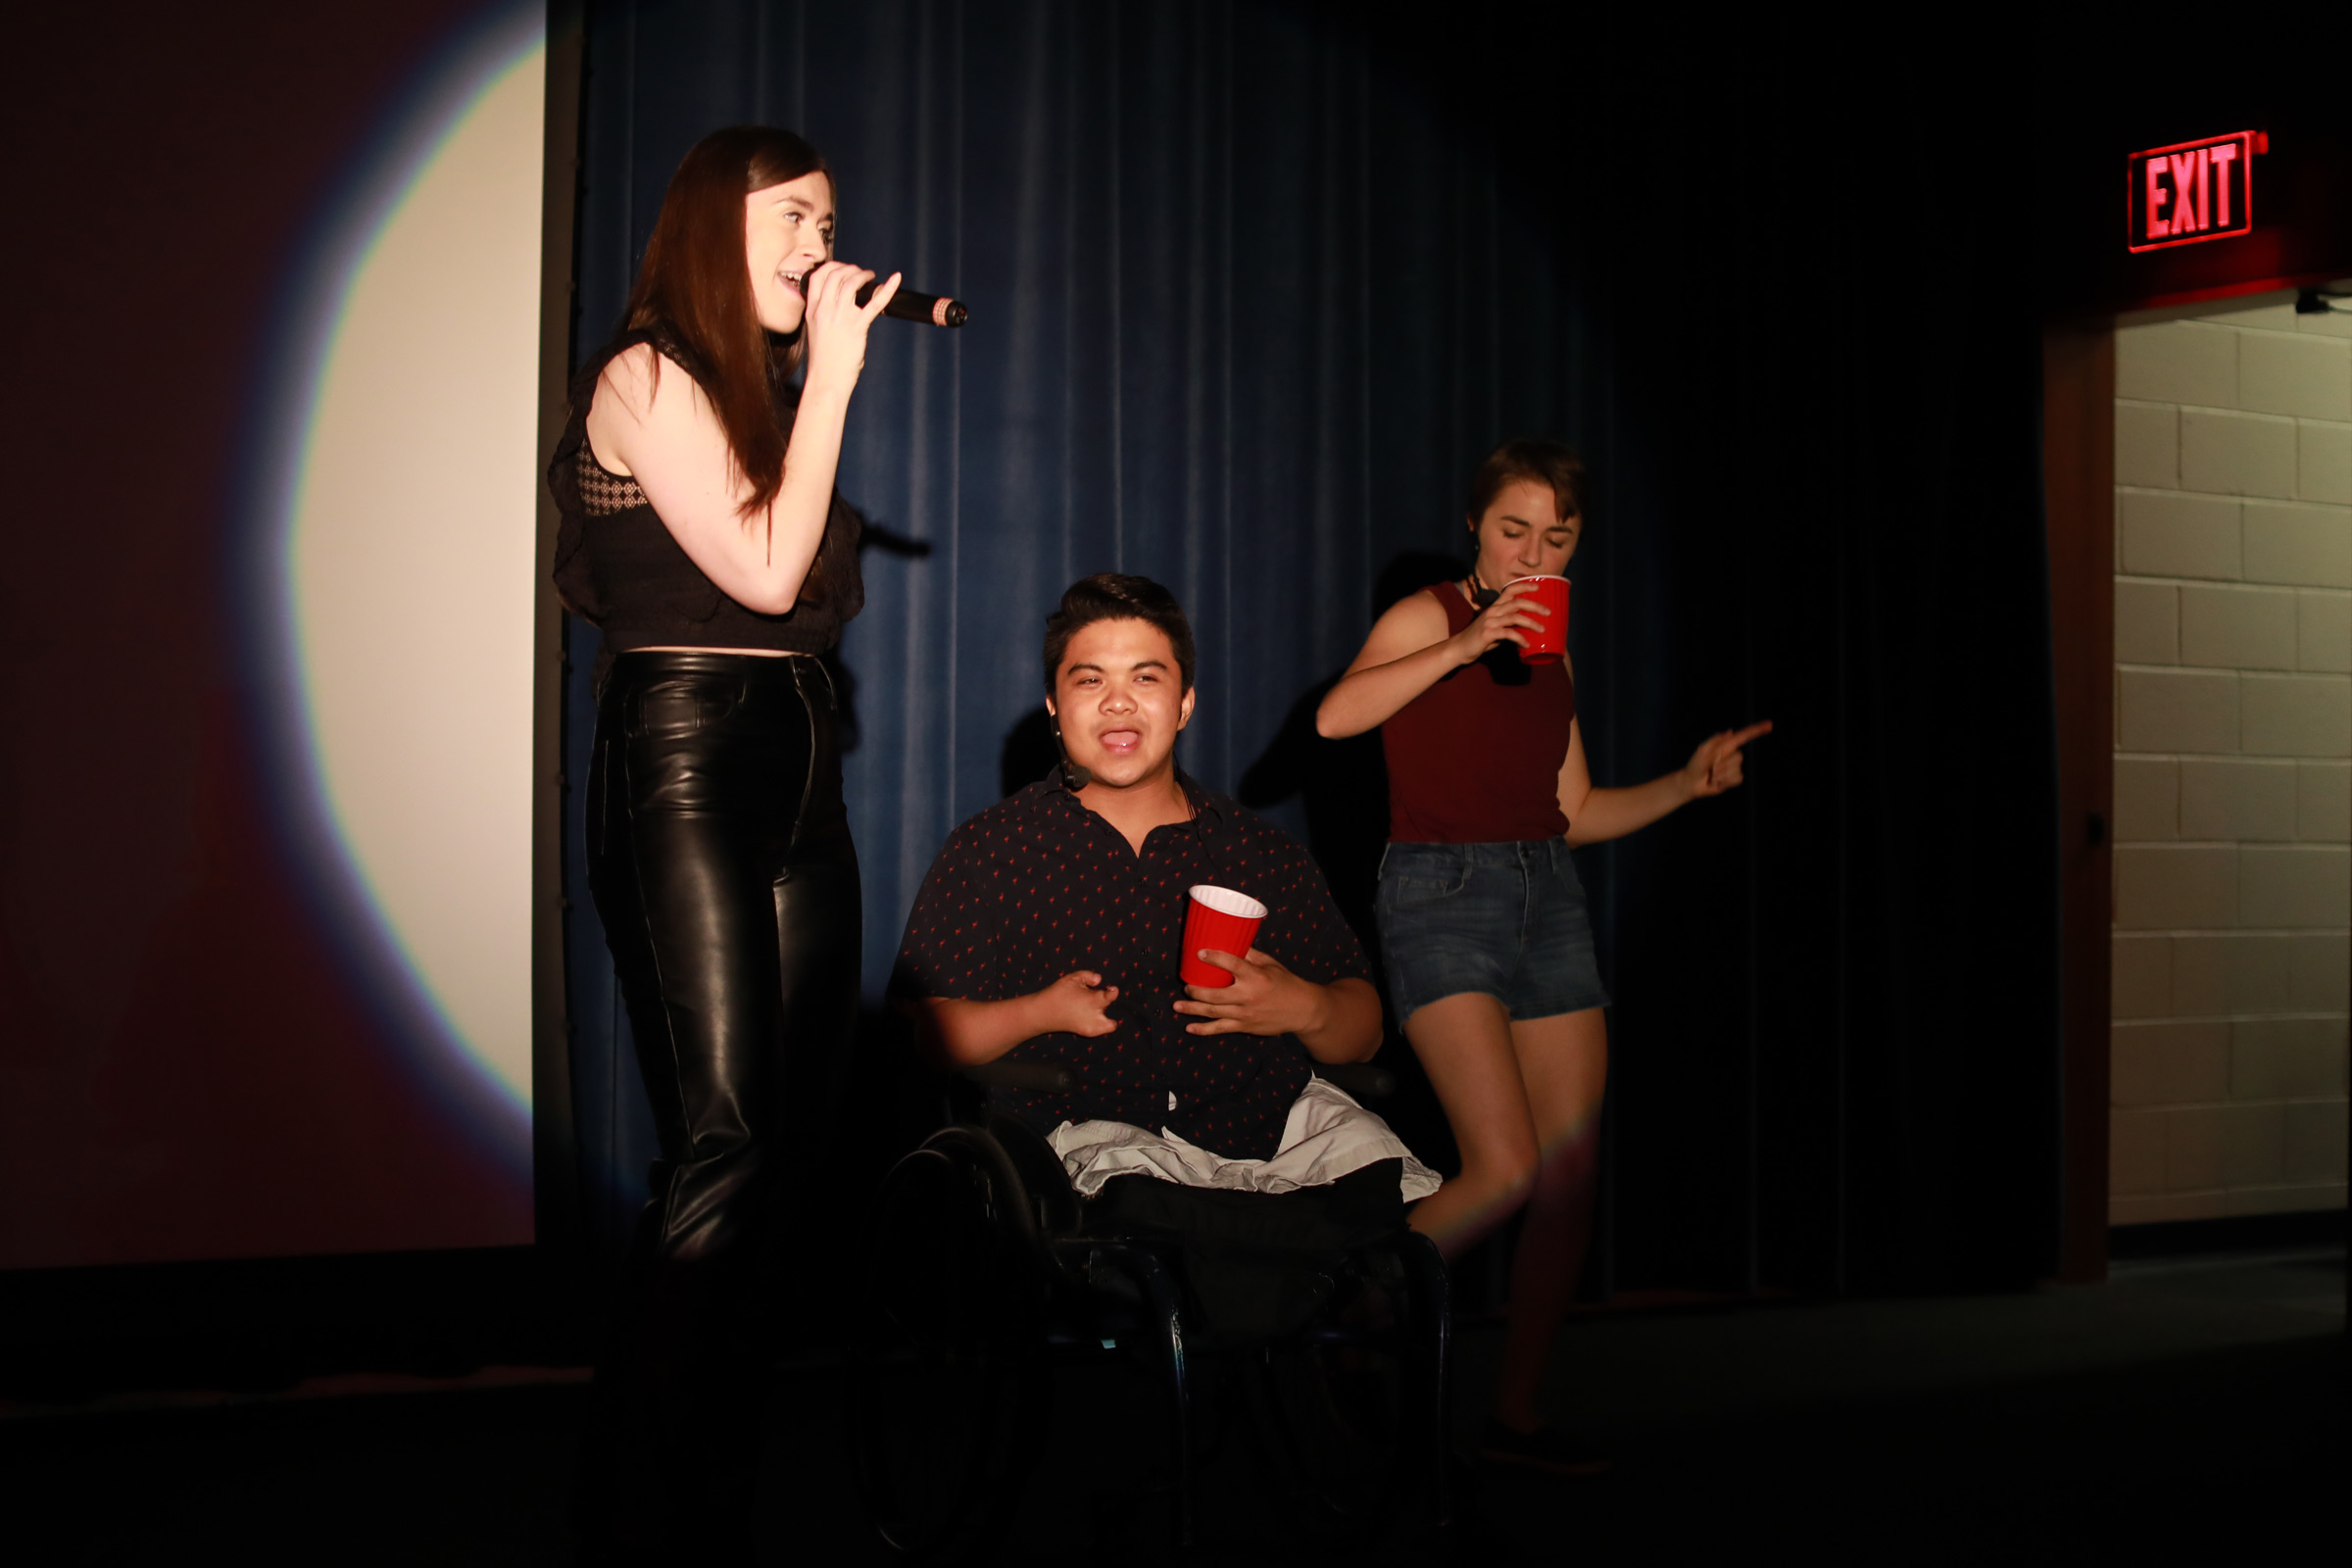 Camano performing in the Libel Show hosted by School of Law